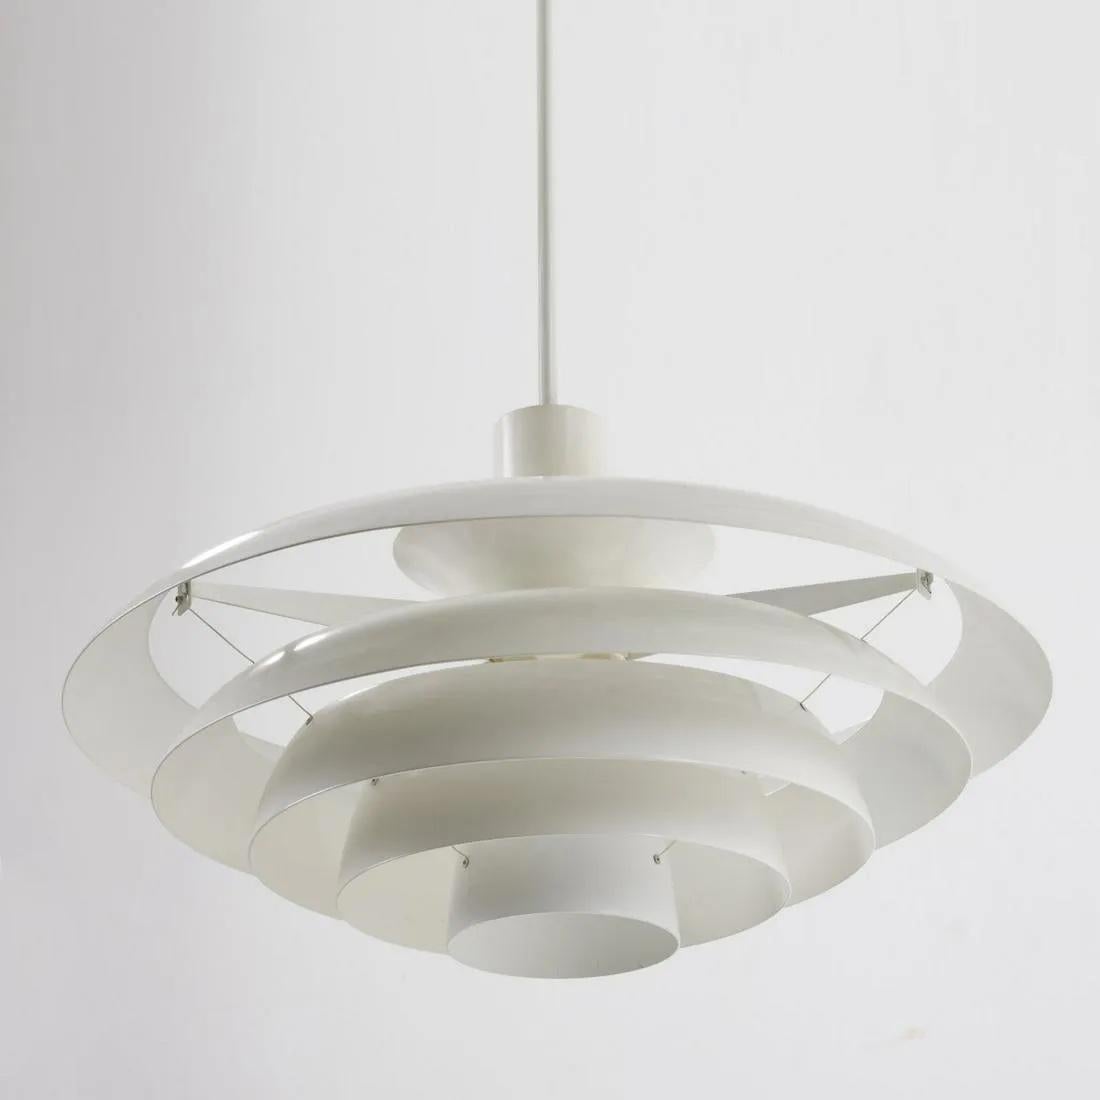 European Ceiling Lights by Fagerhults Ljusarmatur For Sale